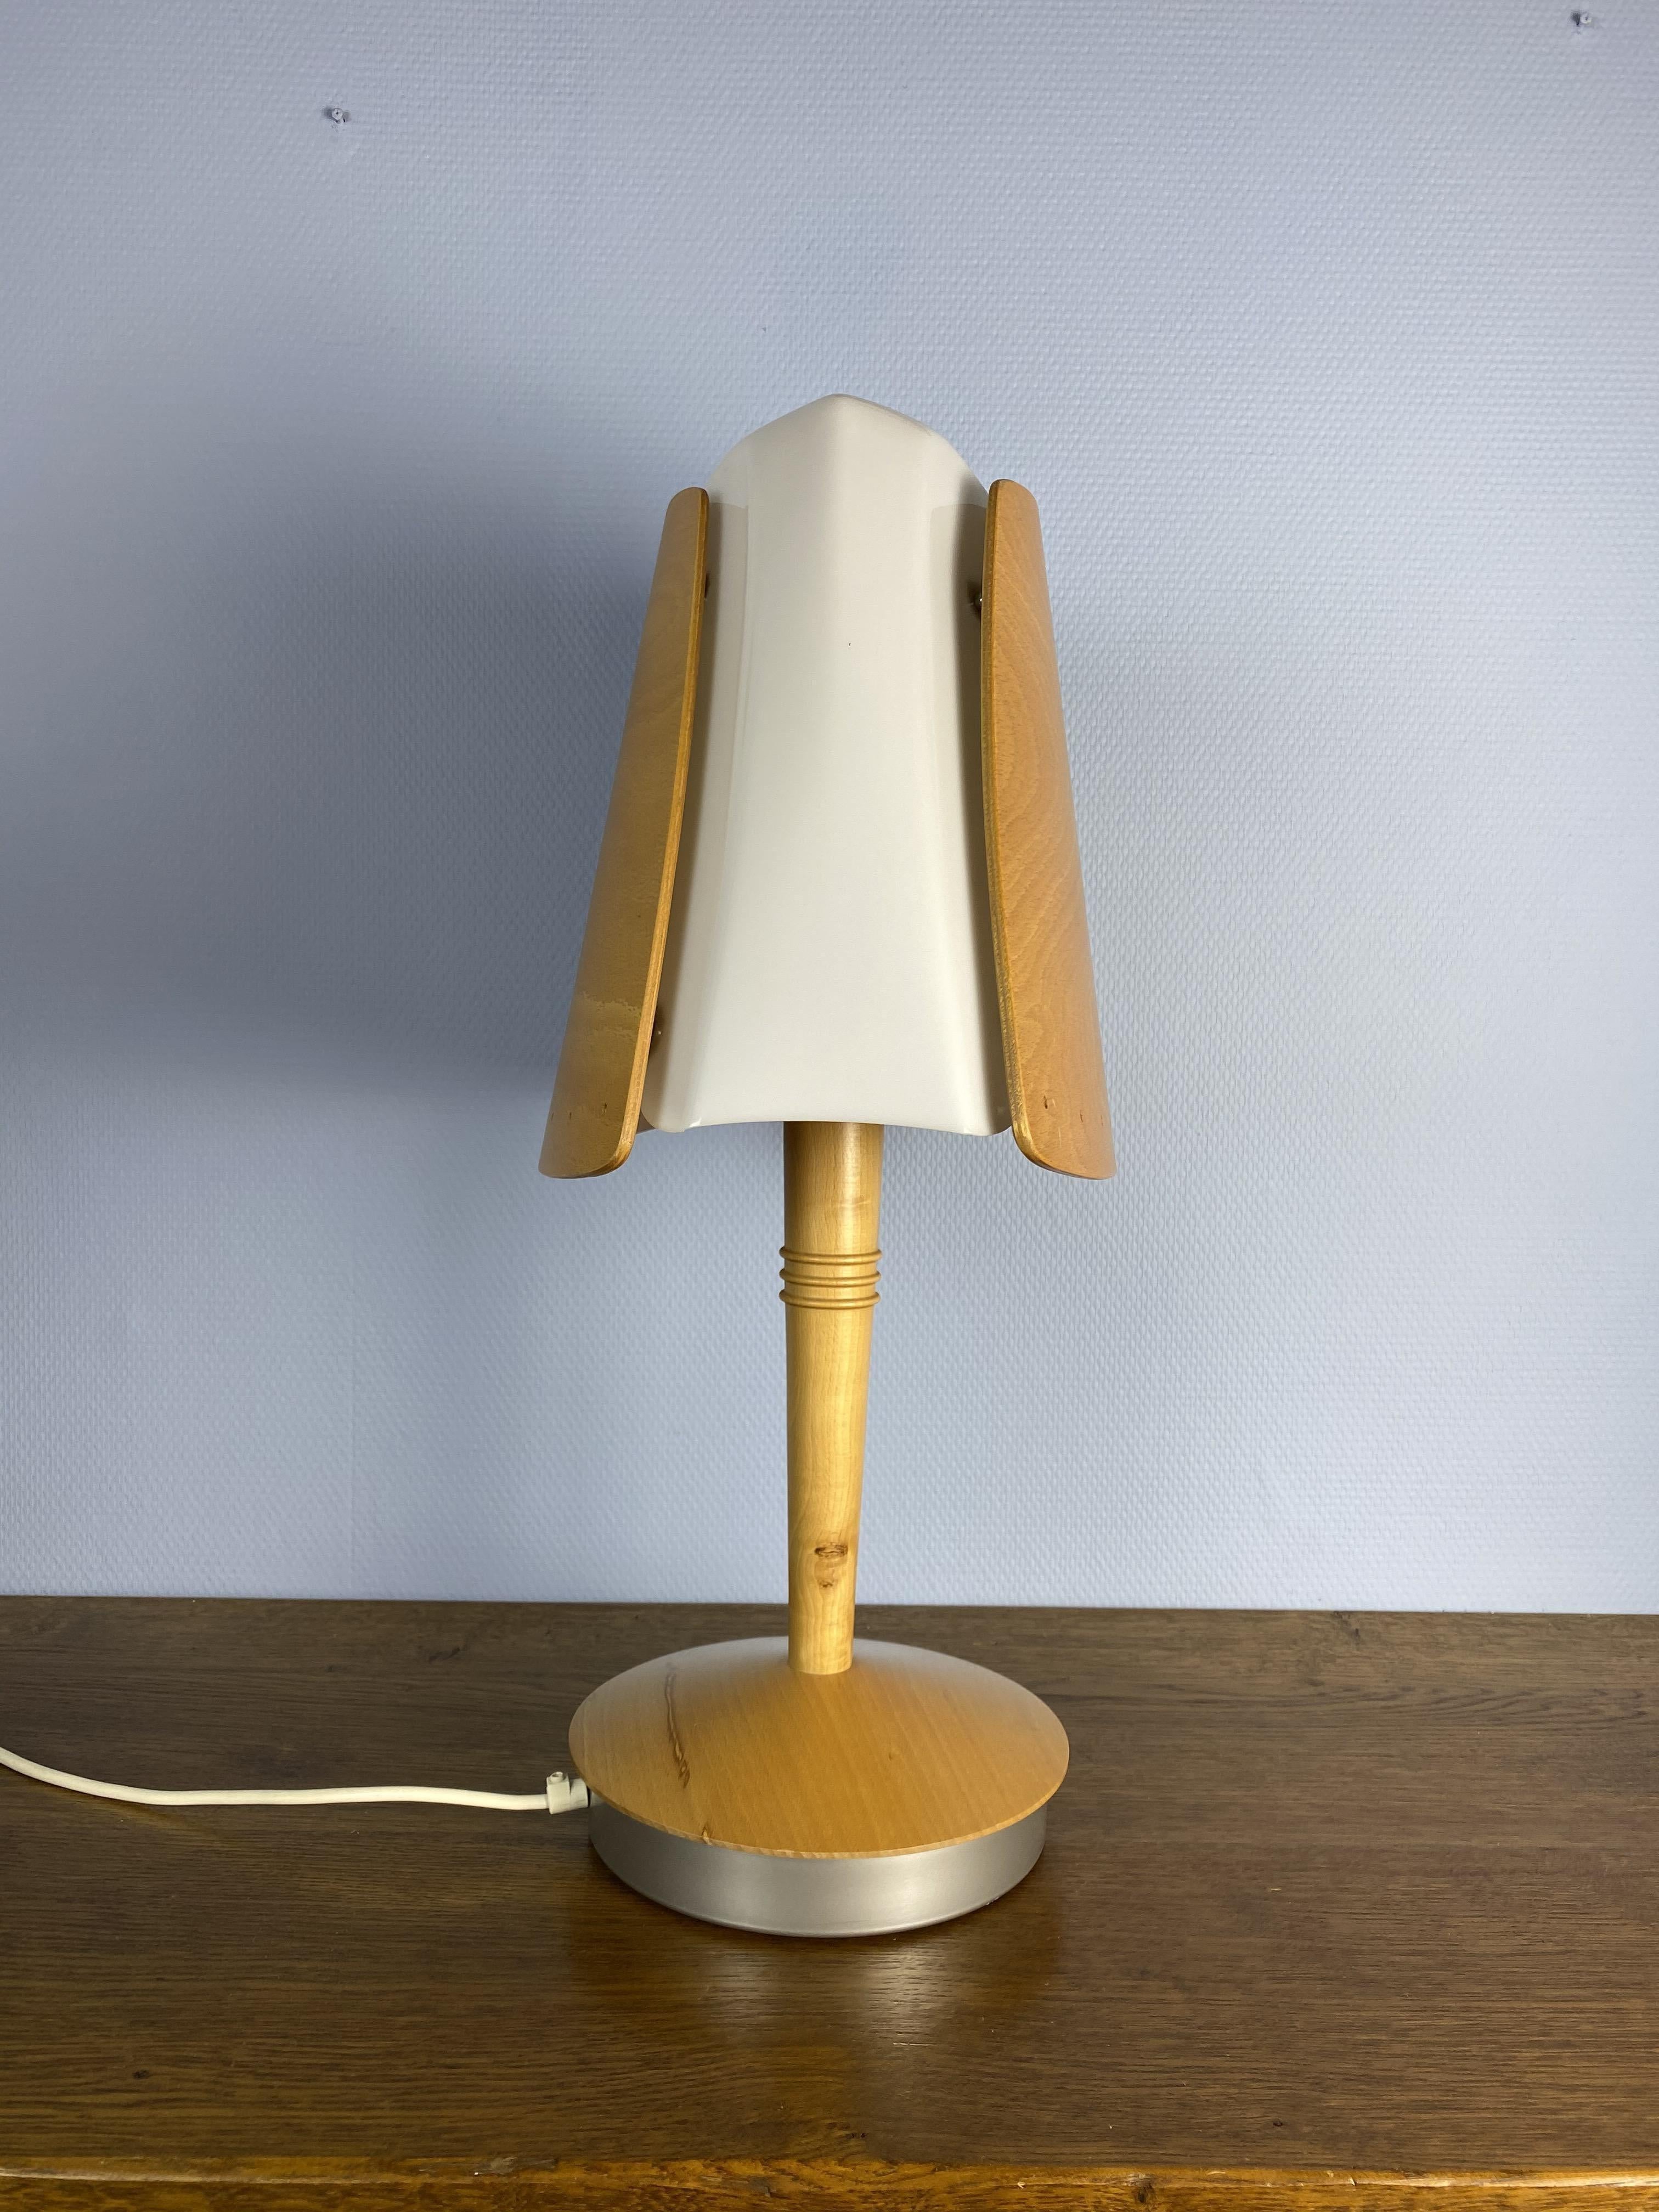 Scandinavian style table lamp by Lucid, France for the special exclusive order from Hilton Hotel in Barcelona. Shade is made of methacrylate and wood.